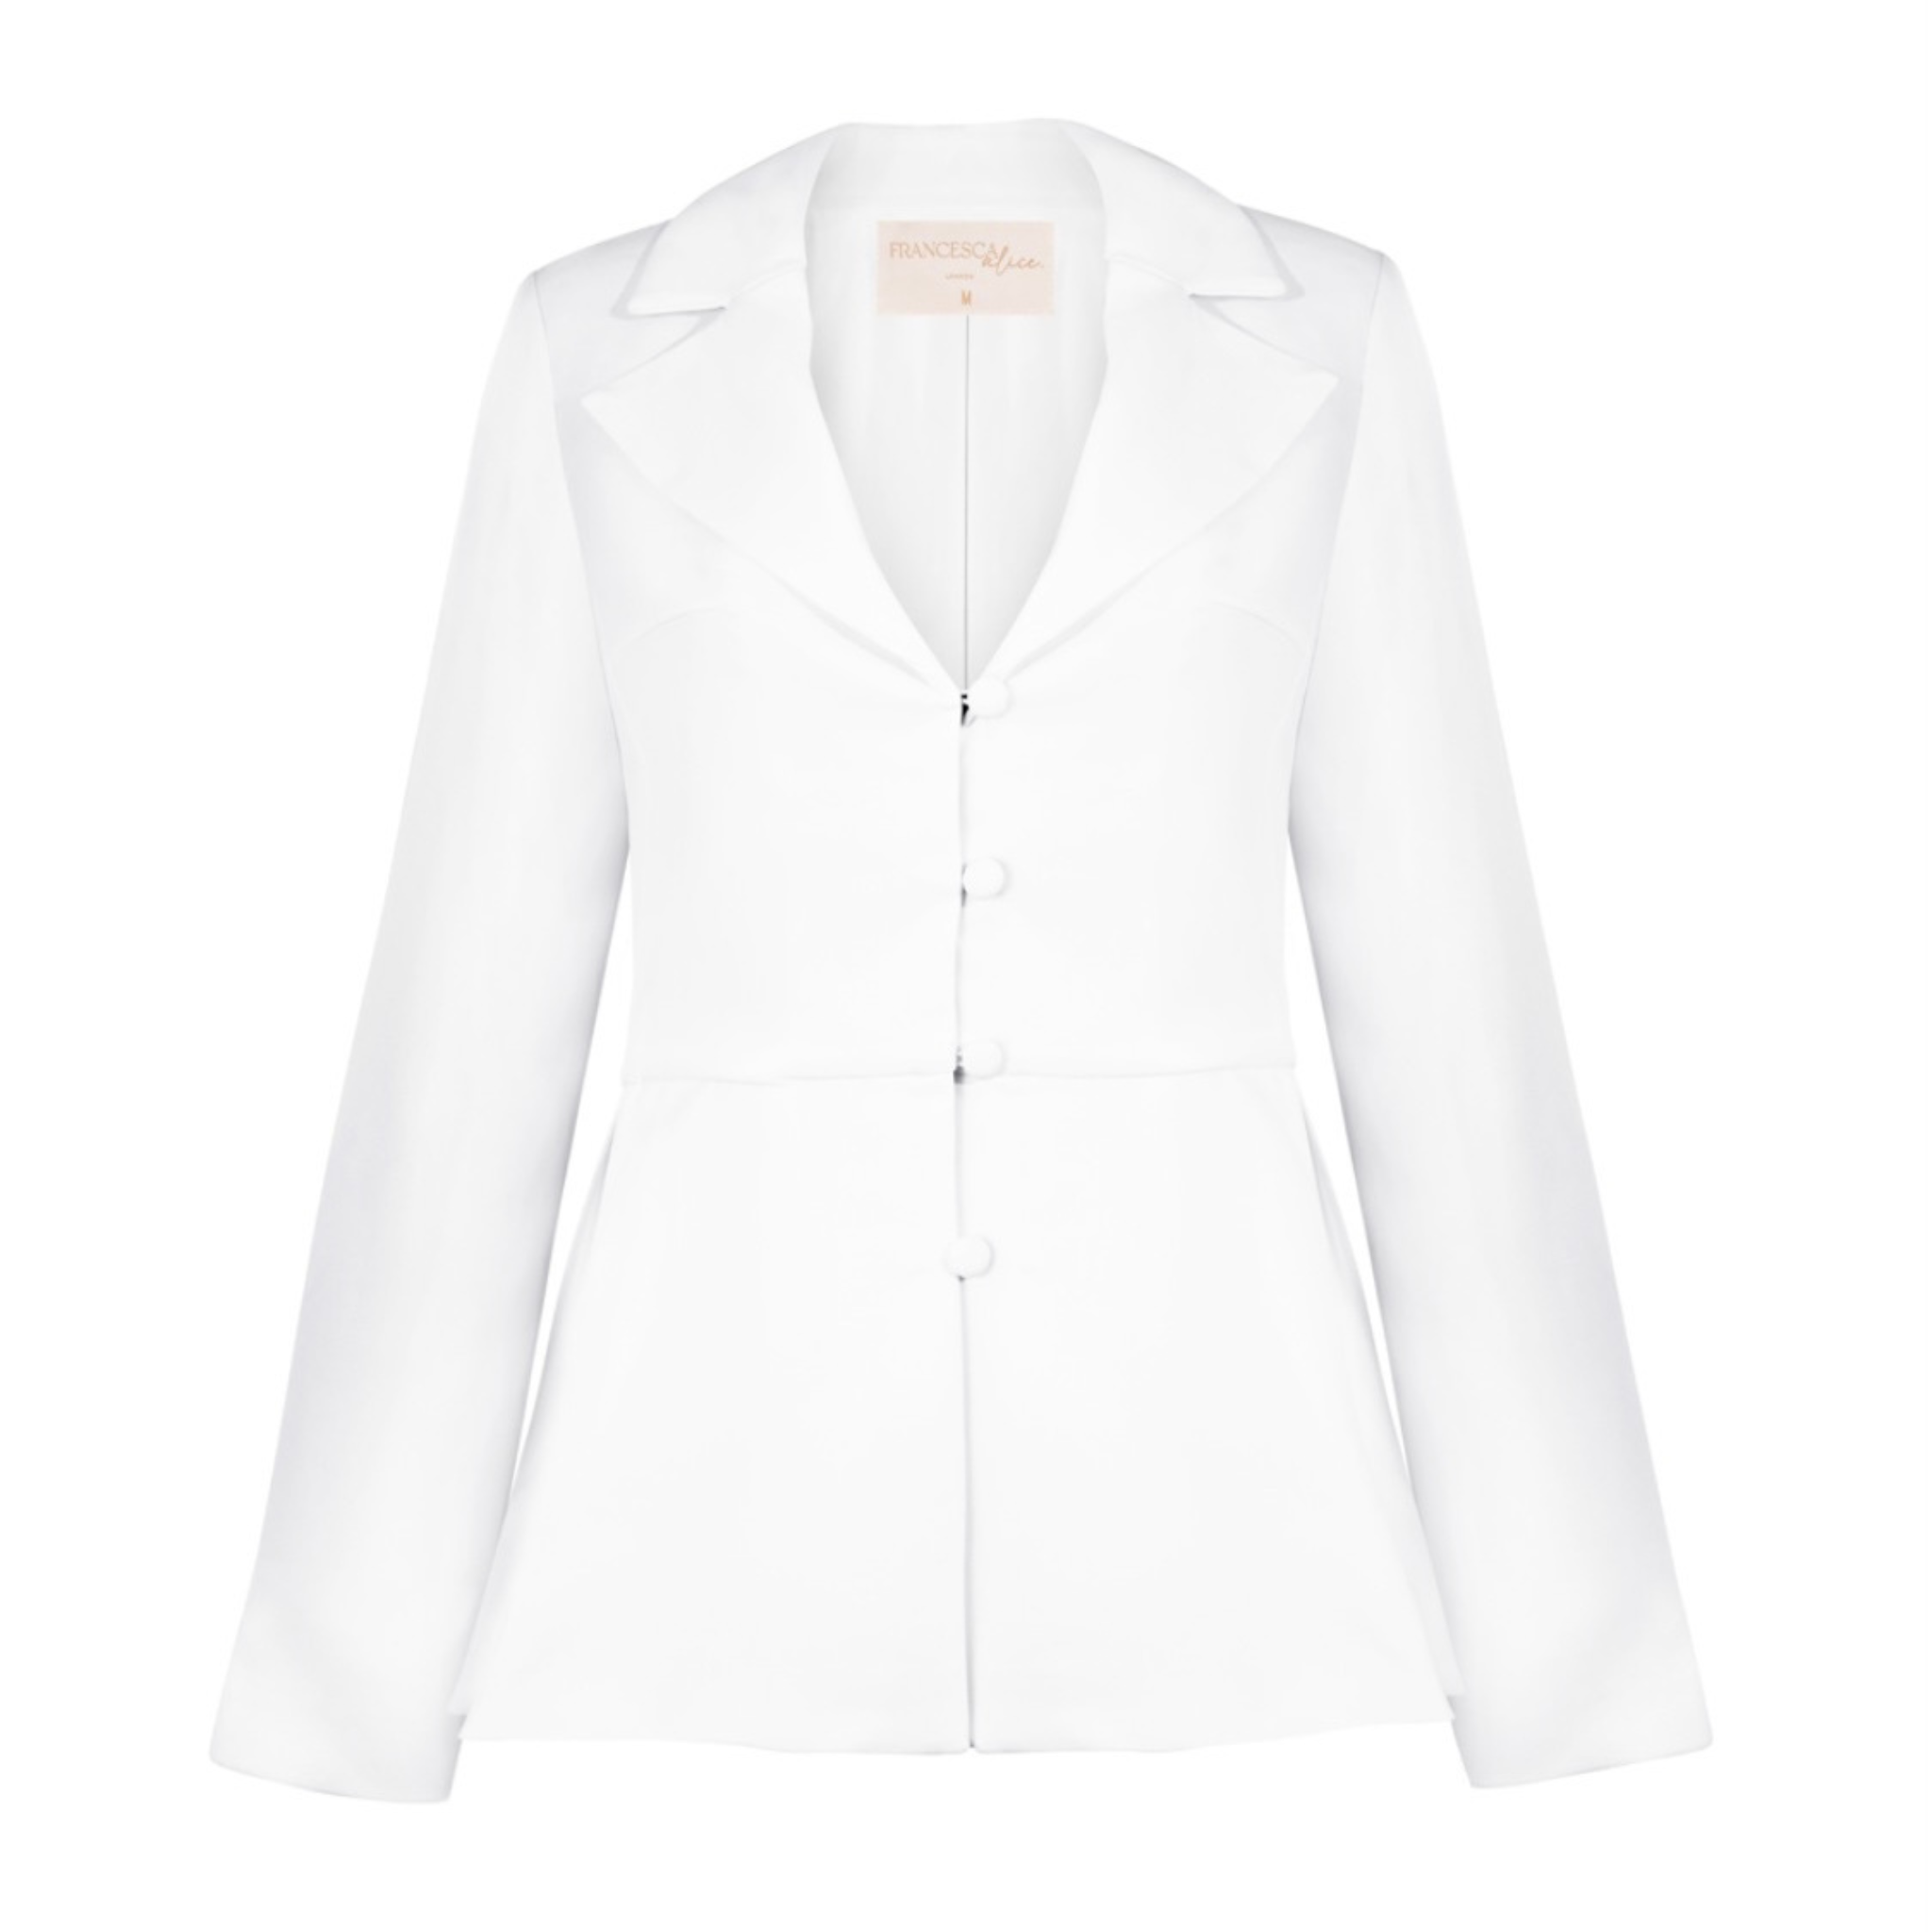 White single-breasted peplum jacket with four-button fastening. This stylish jacket features a peplum silhouette with a flattering fit and a sleek single-breasted design. The crisp white color adds a touch of sophistication, making it a versatile and fashionable choice for any ensemble.